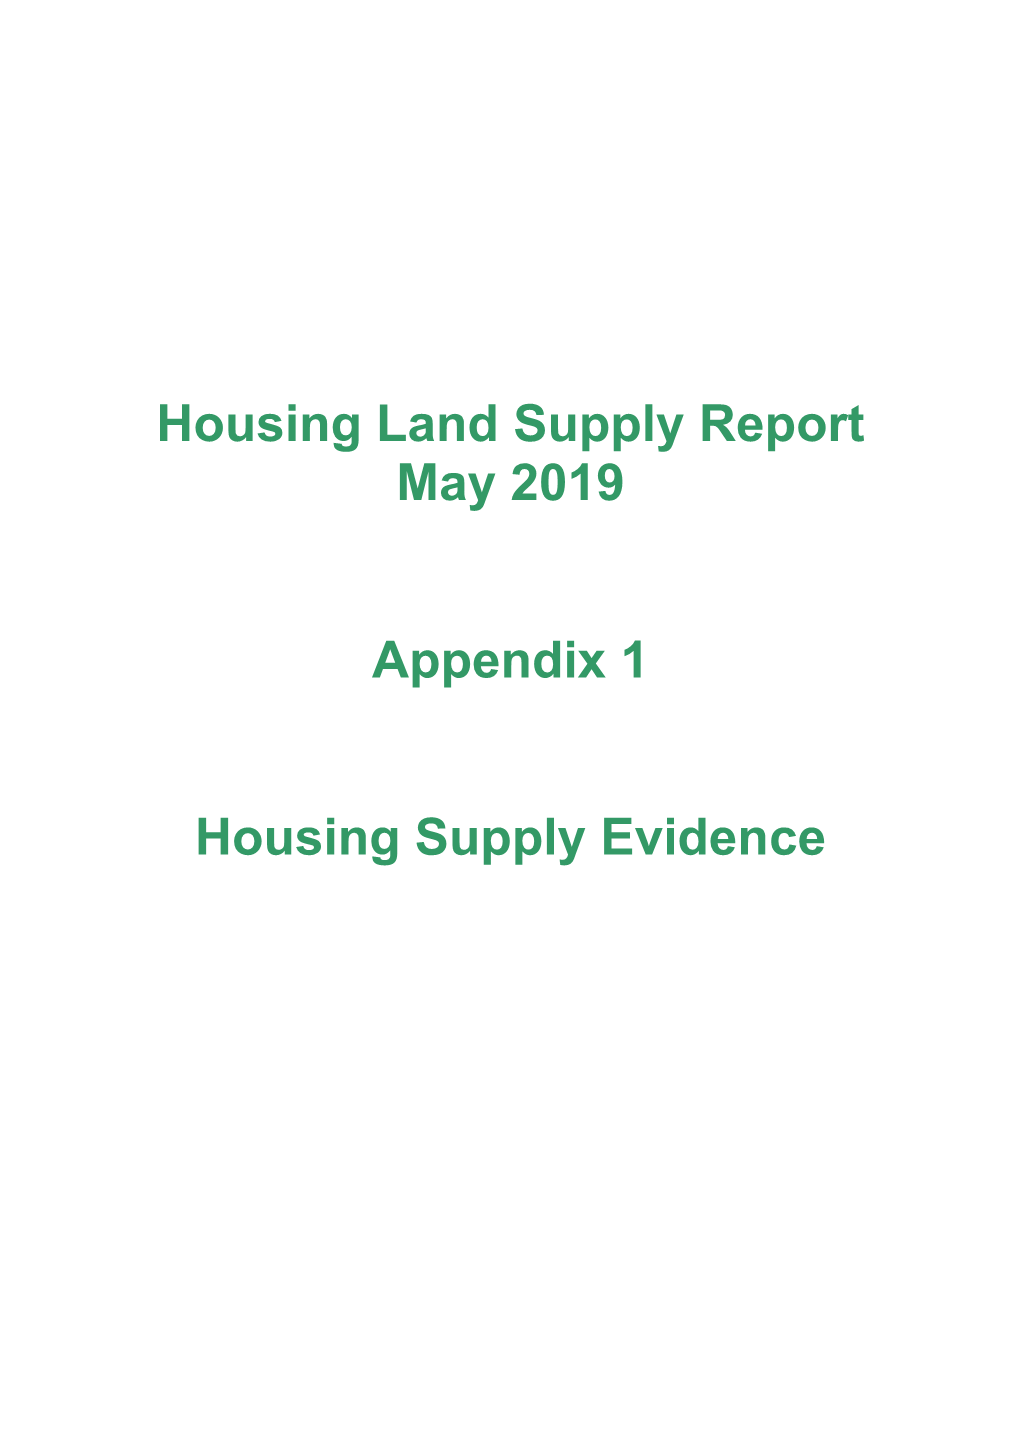 Housing Land Supply Report May 2019 Appendix 1 Housing Supply